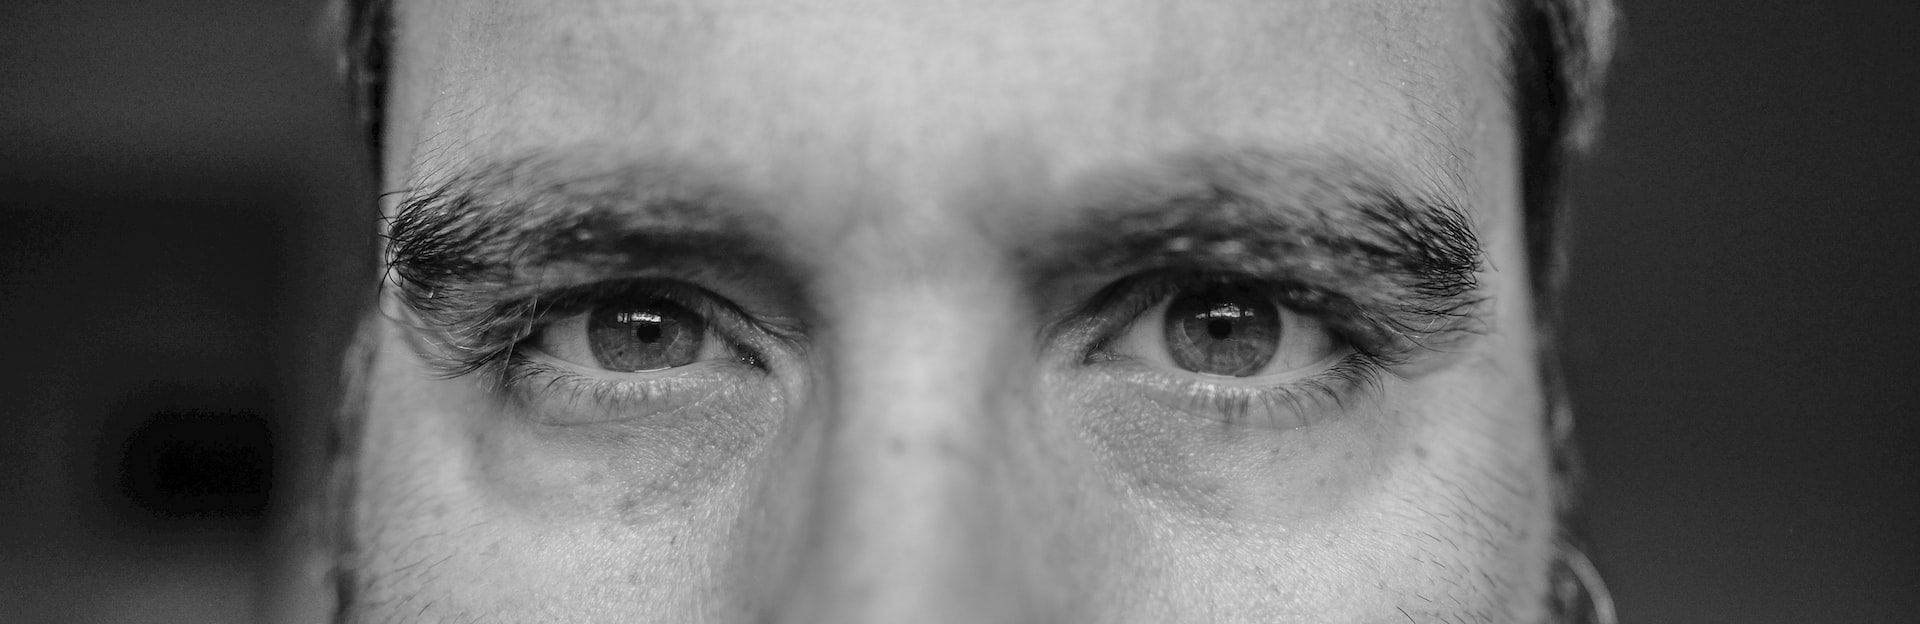 Extreme close-up of a mans eyes in black and white.